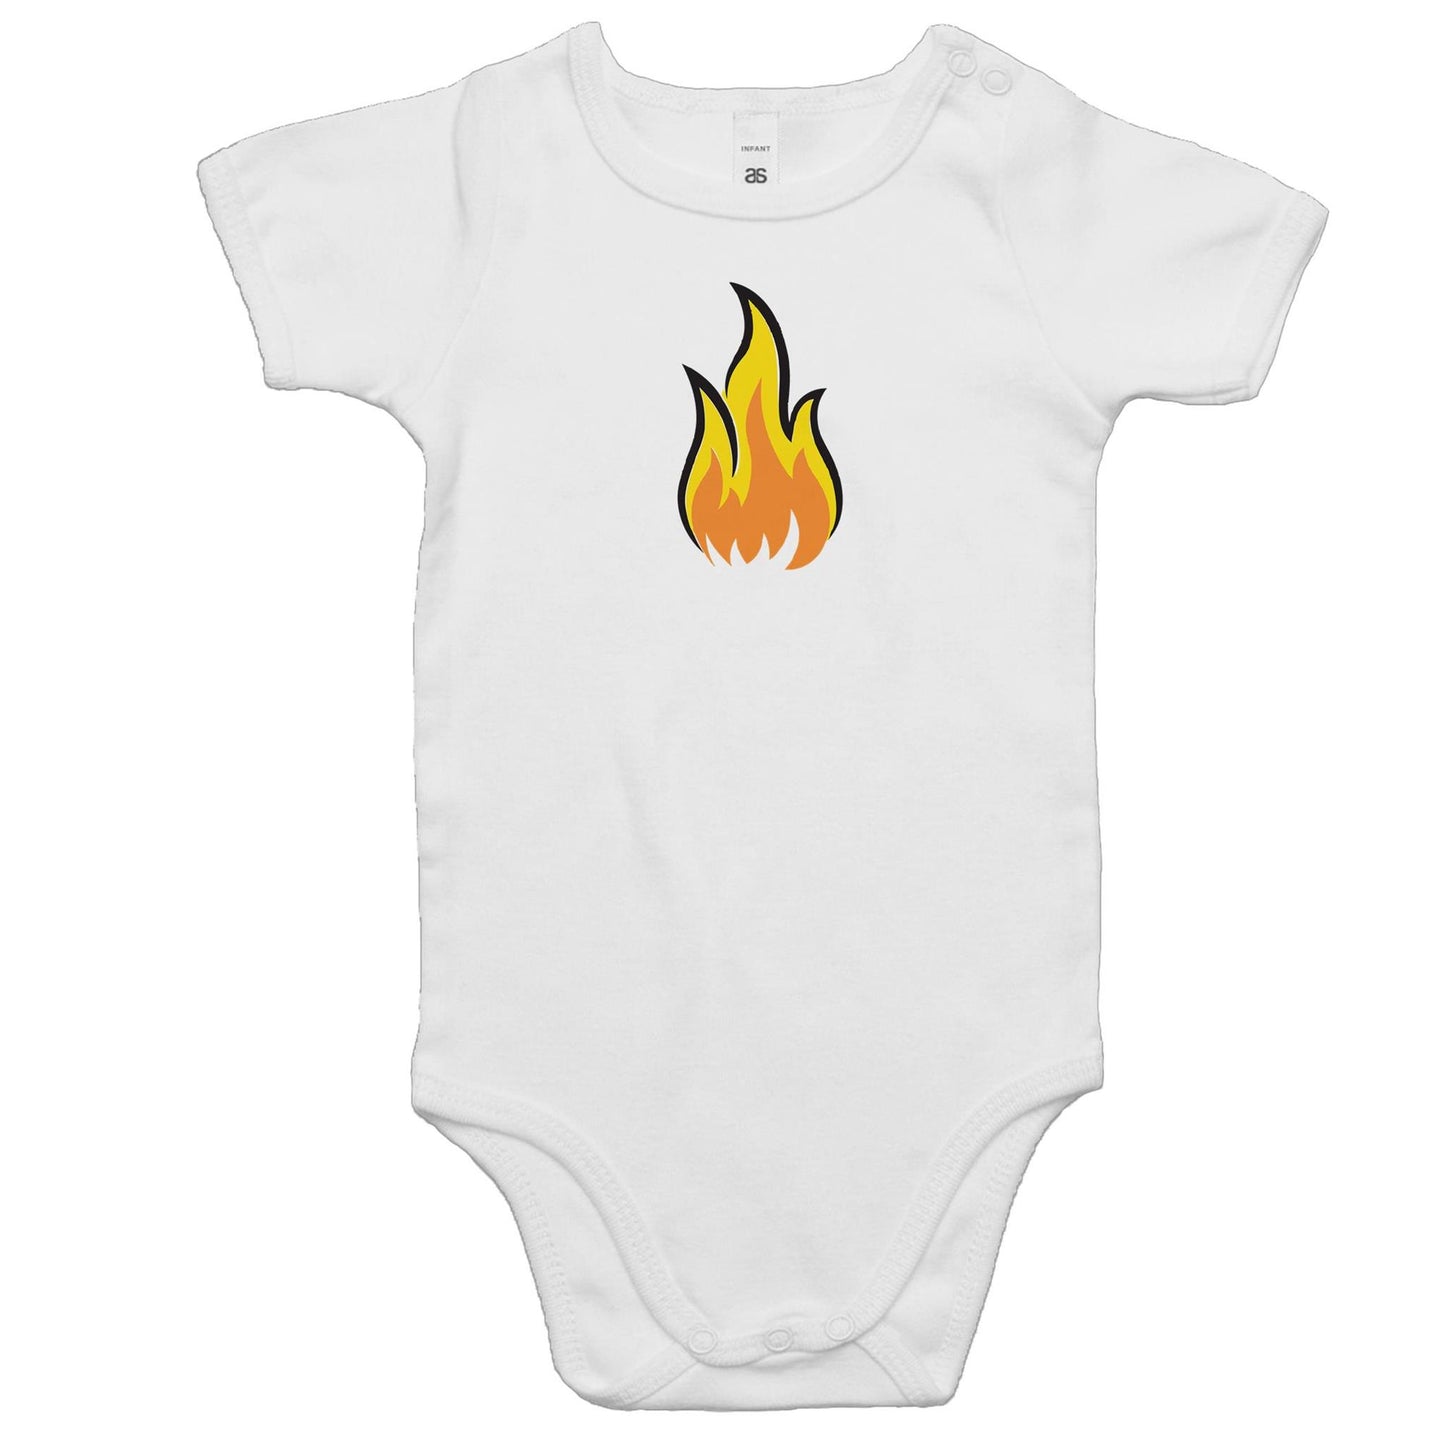 Flame Rompers for Babies